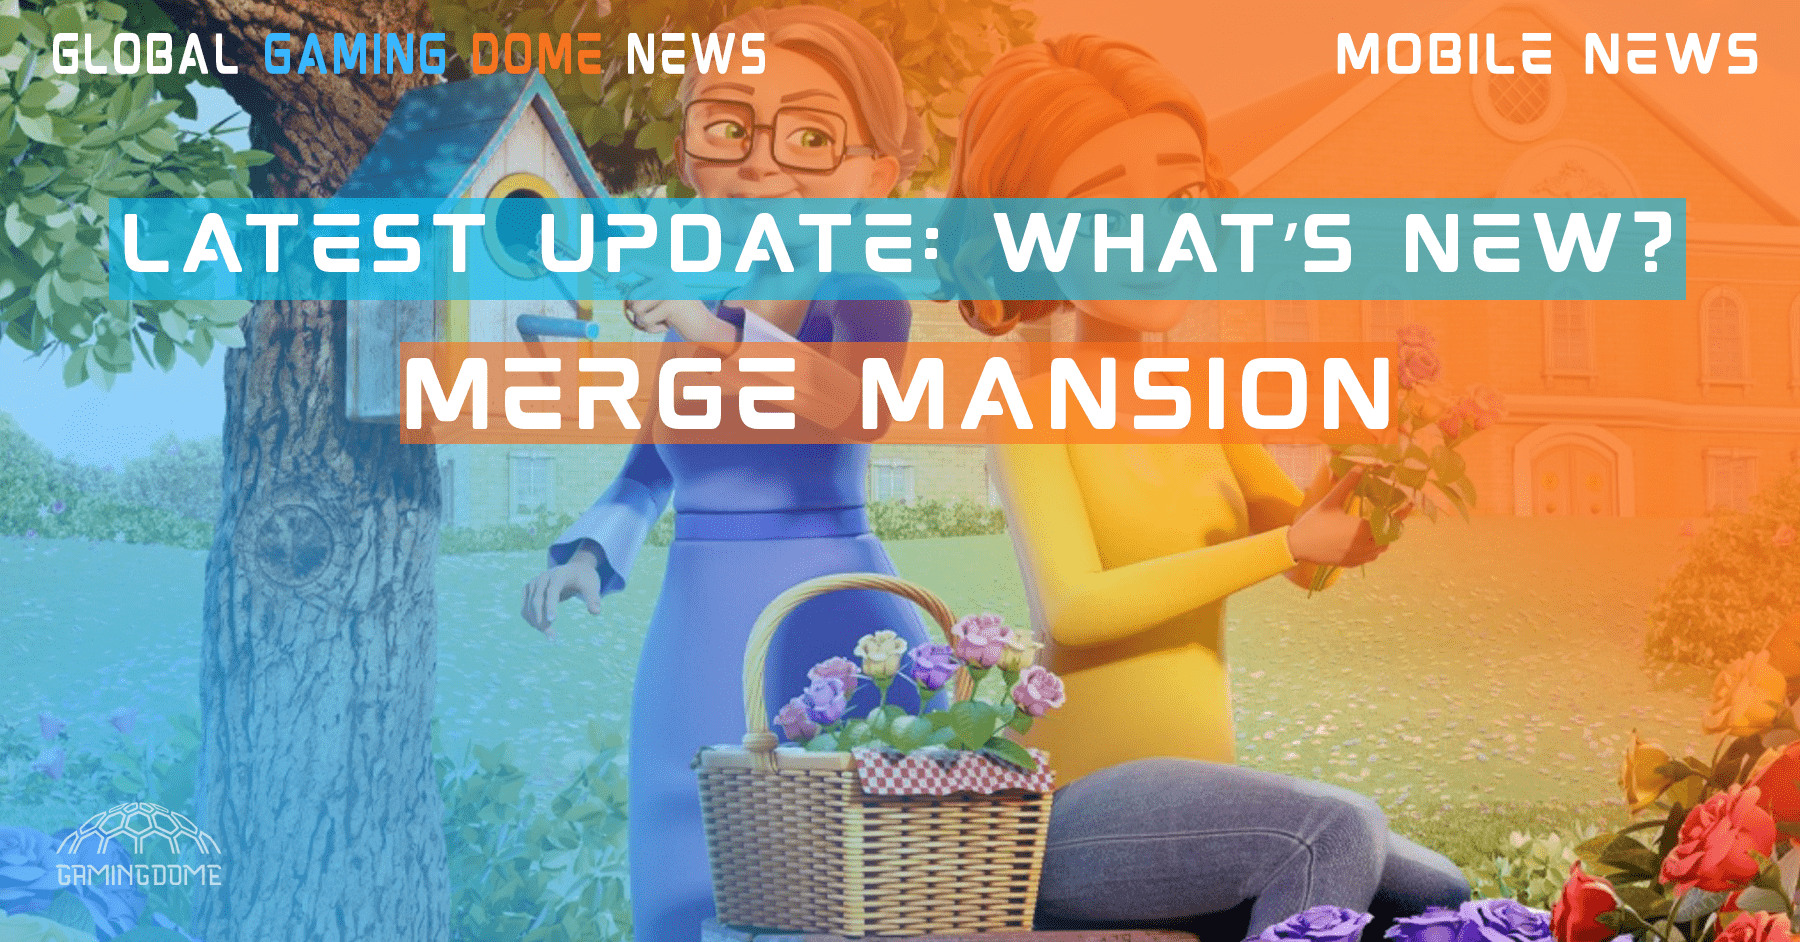 MERGE MANSION LATEST UPDATE: WHAT’S NEW?